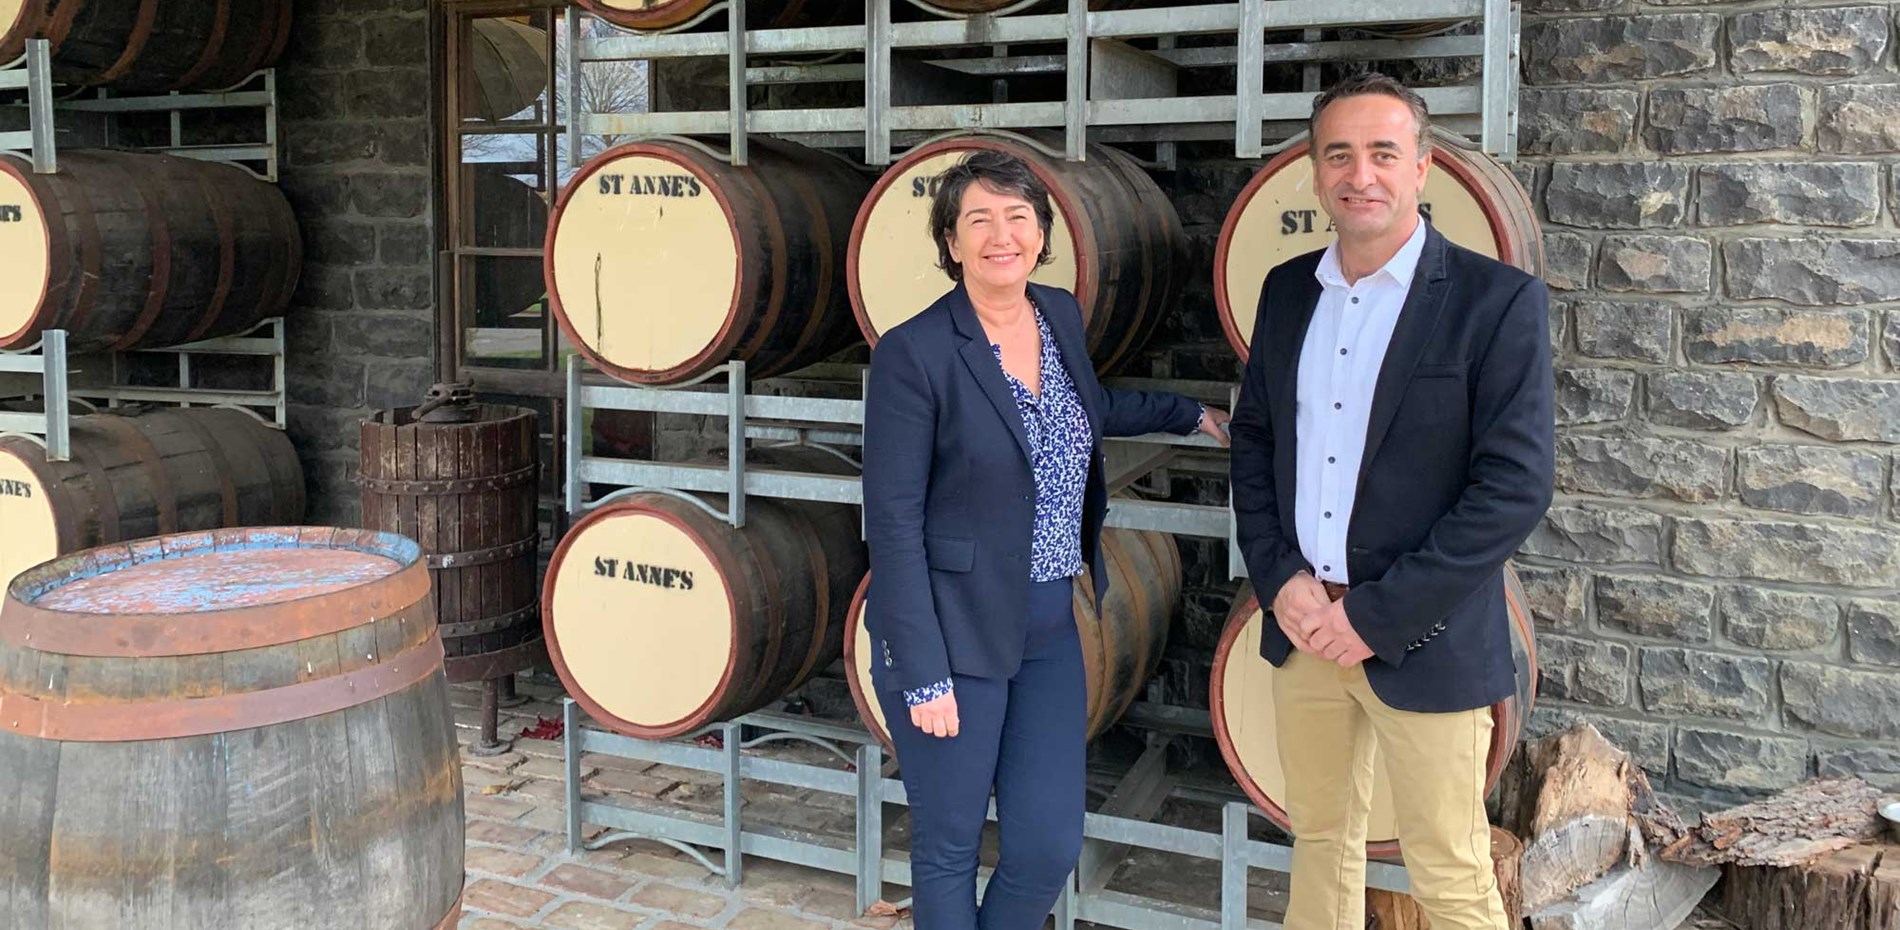 ST ANNE’S WINERY AWARDED A WINE GROWTH GRANT FUND Main Image